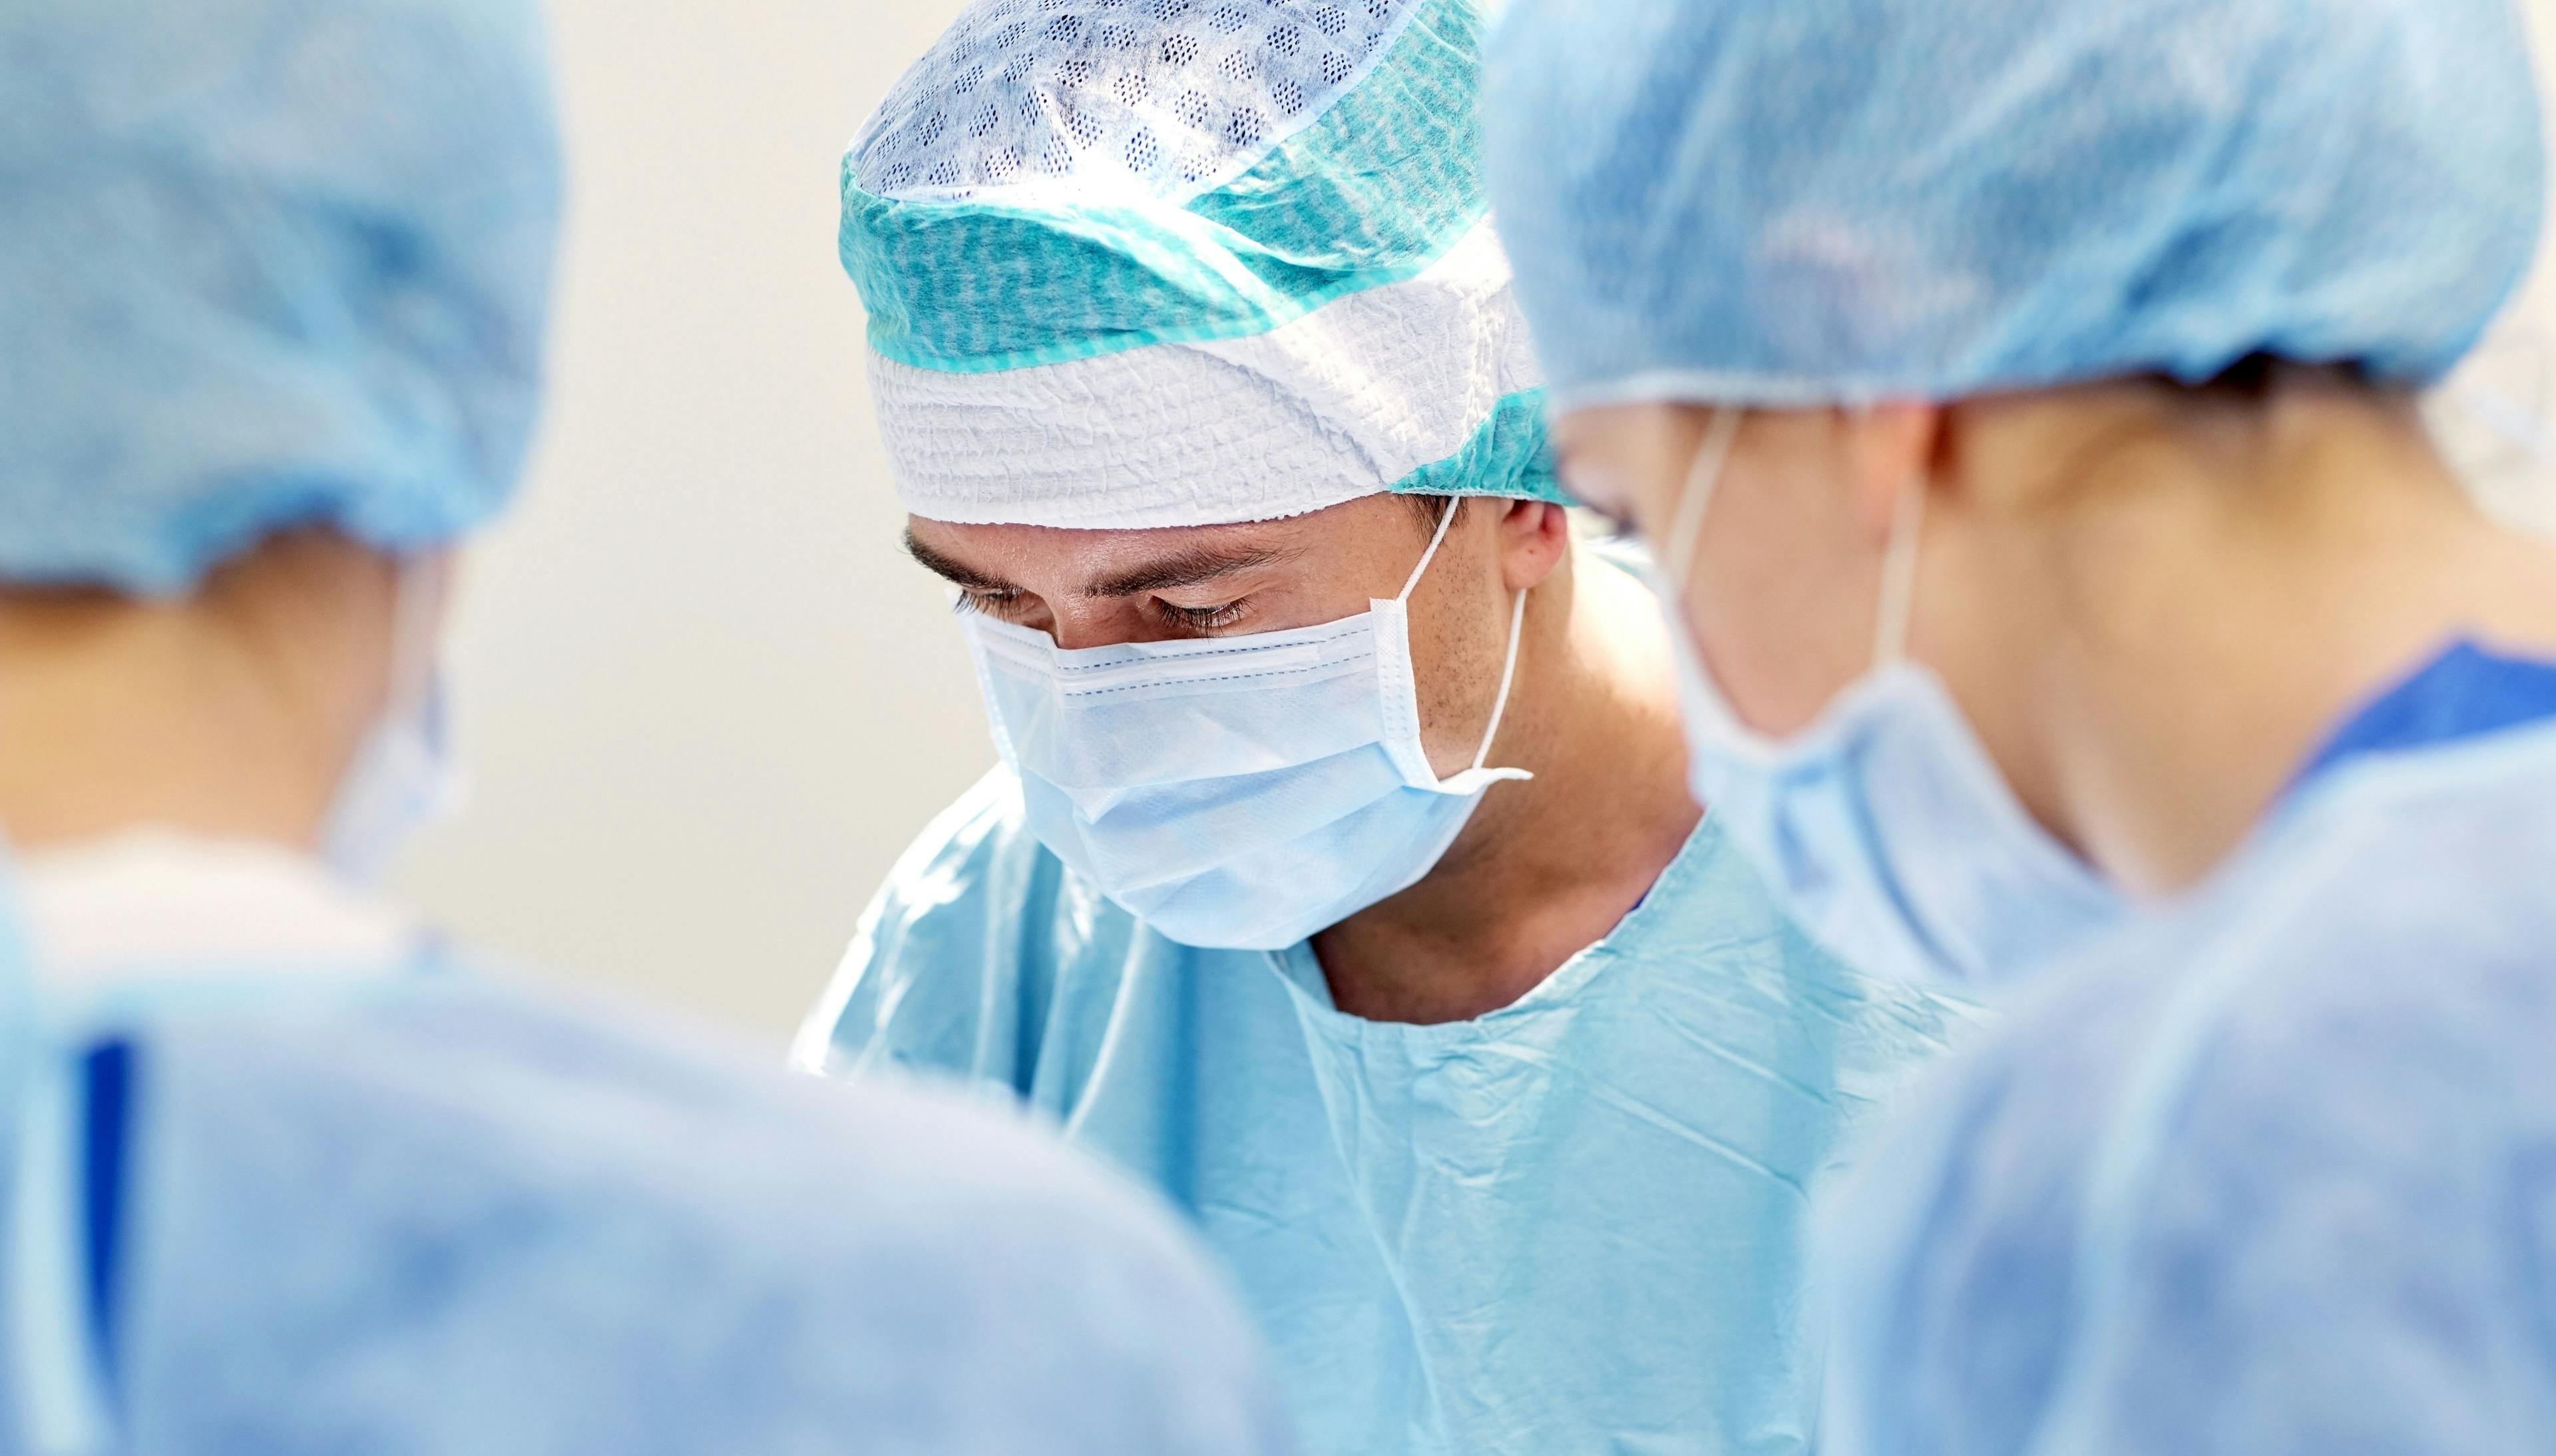 The number of gender-affirming surgeries nearly tripled from 2016 to 2019, a new study has found. (Image credit: ©Syda Productions - stock.adobe.com)